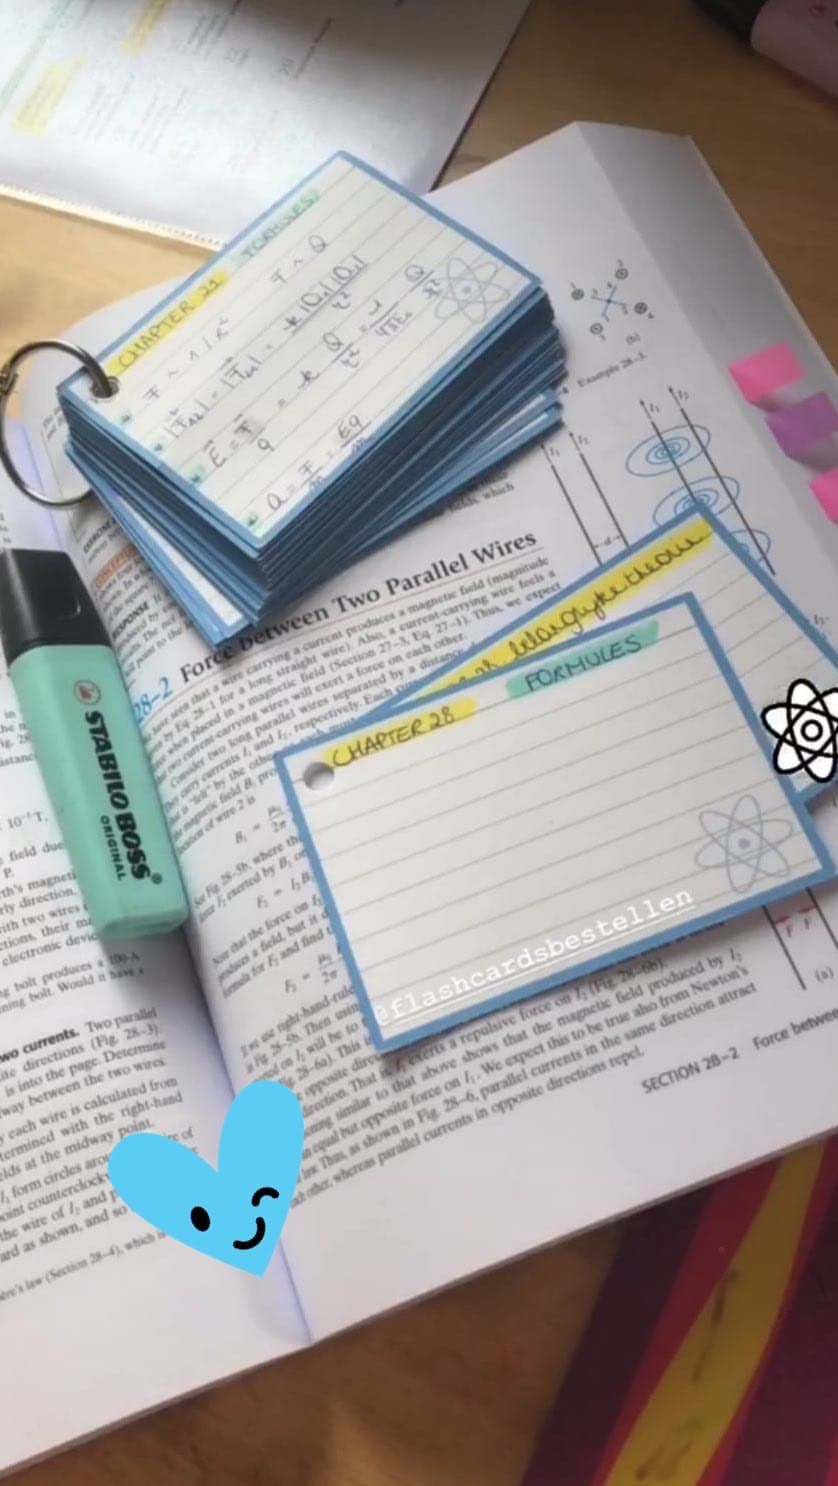 Use flashcards for your exams - Flashcards and Stationery